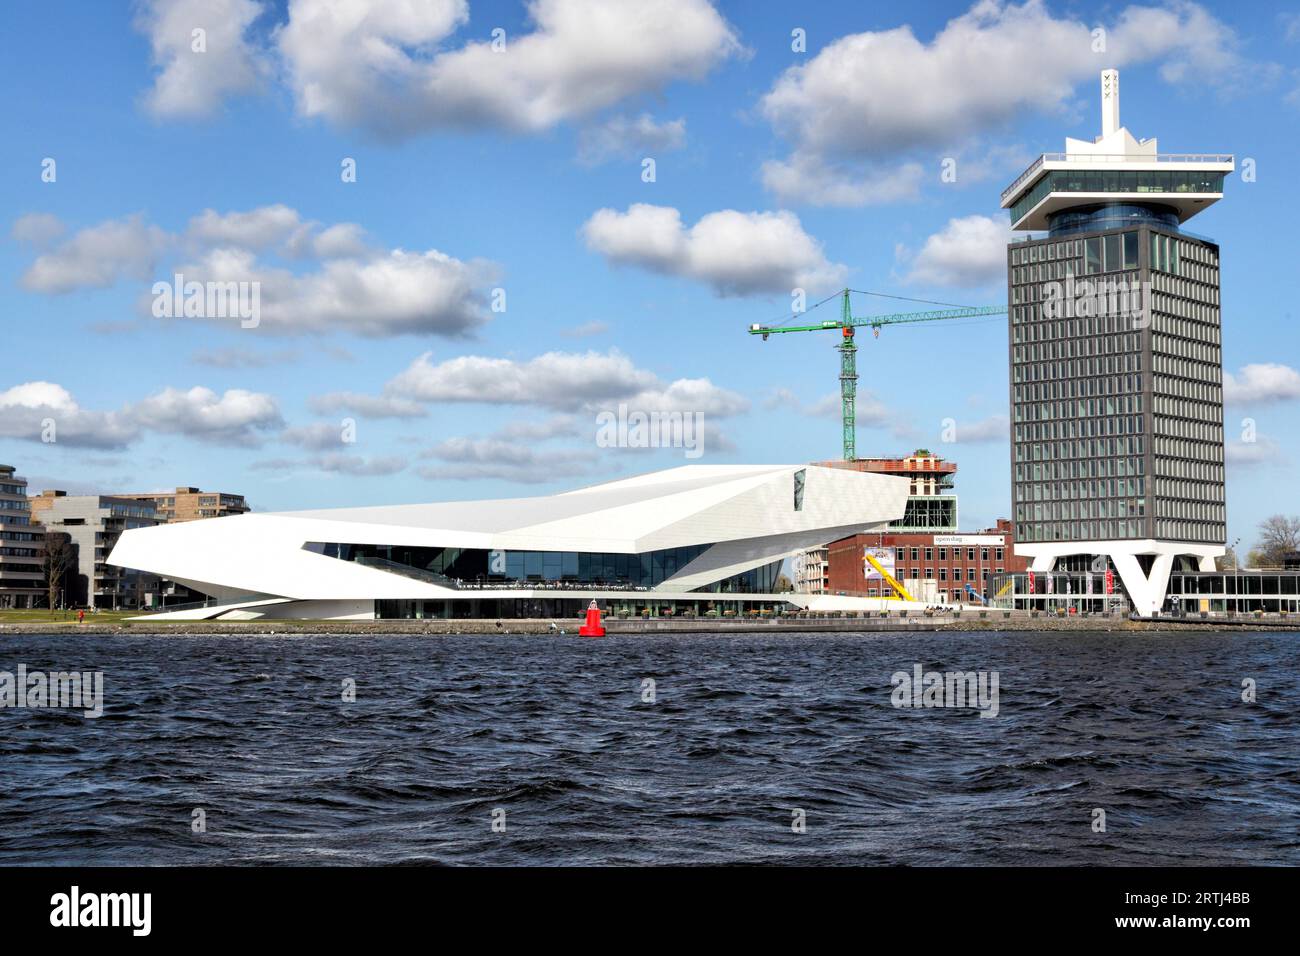 The EYE Film Museum in the Port of Amsterdam, Netherlands Stock Photo